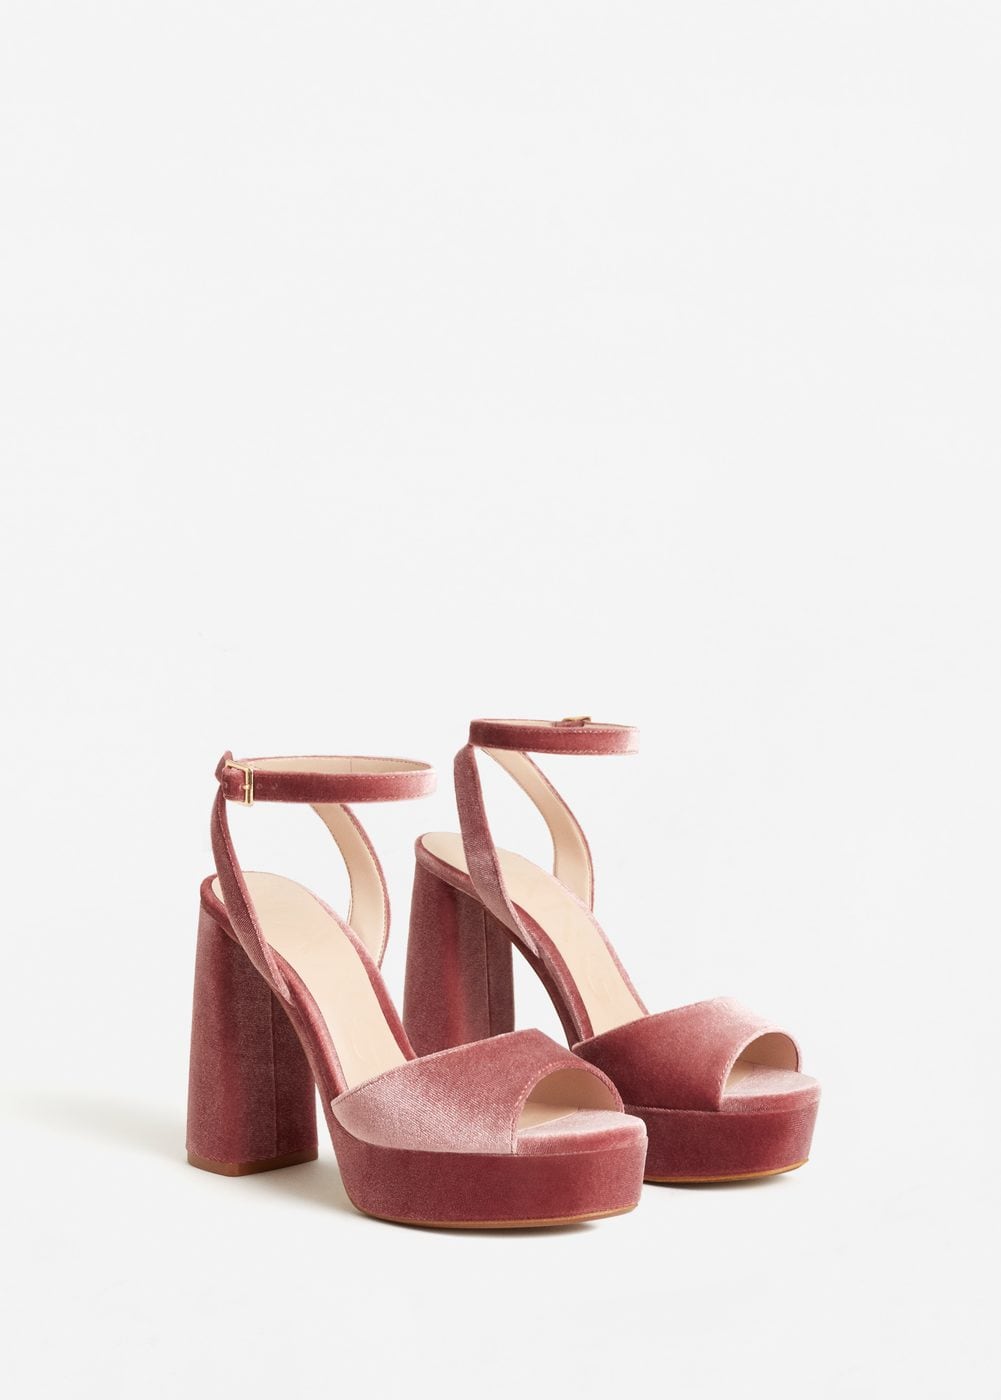 17. sandales-talons-carre-velours-rose-chaussures-mariee